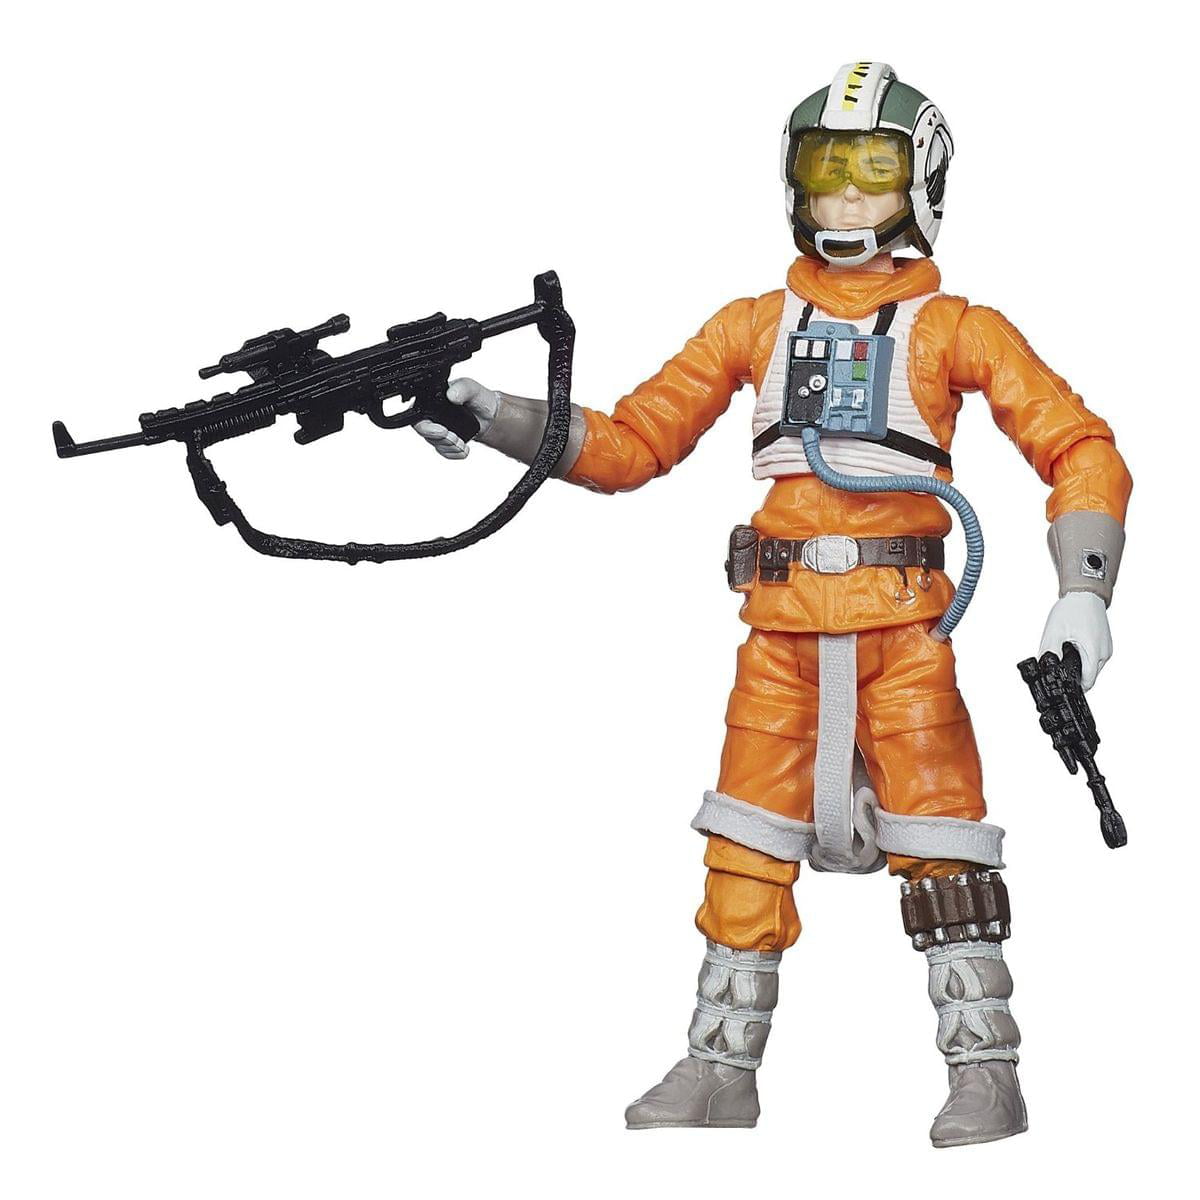 Hasbro Star Wars The Black Series Wedge Antilles Toy Action Figure for sale online 